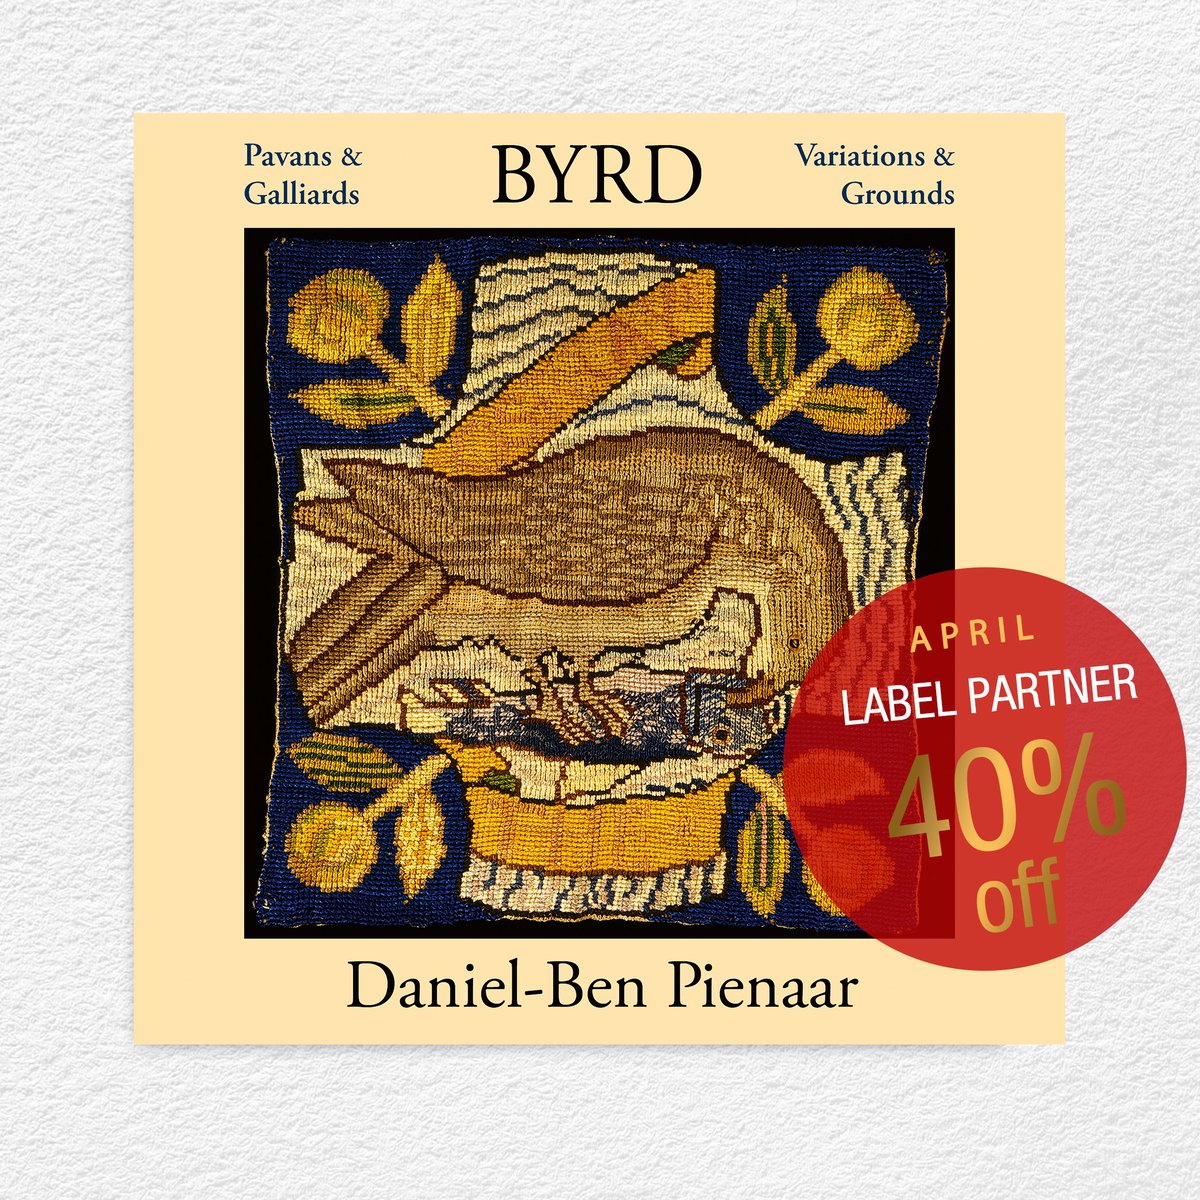 Explore our label partner sale with @avierec 🚨💿 Get 40% off Byrd: Pavans & Galliards / Variations & Grounds and many more great albums! ⭐⭐⭐⭐ BBC Music Magazine Shop the sale👉tinyurl.com/bde976t2